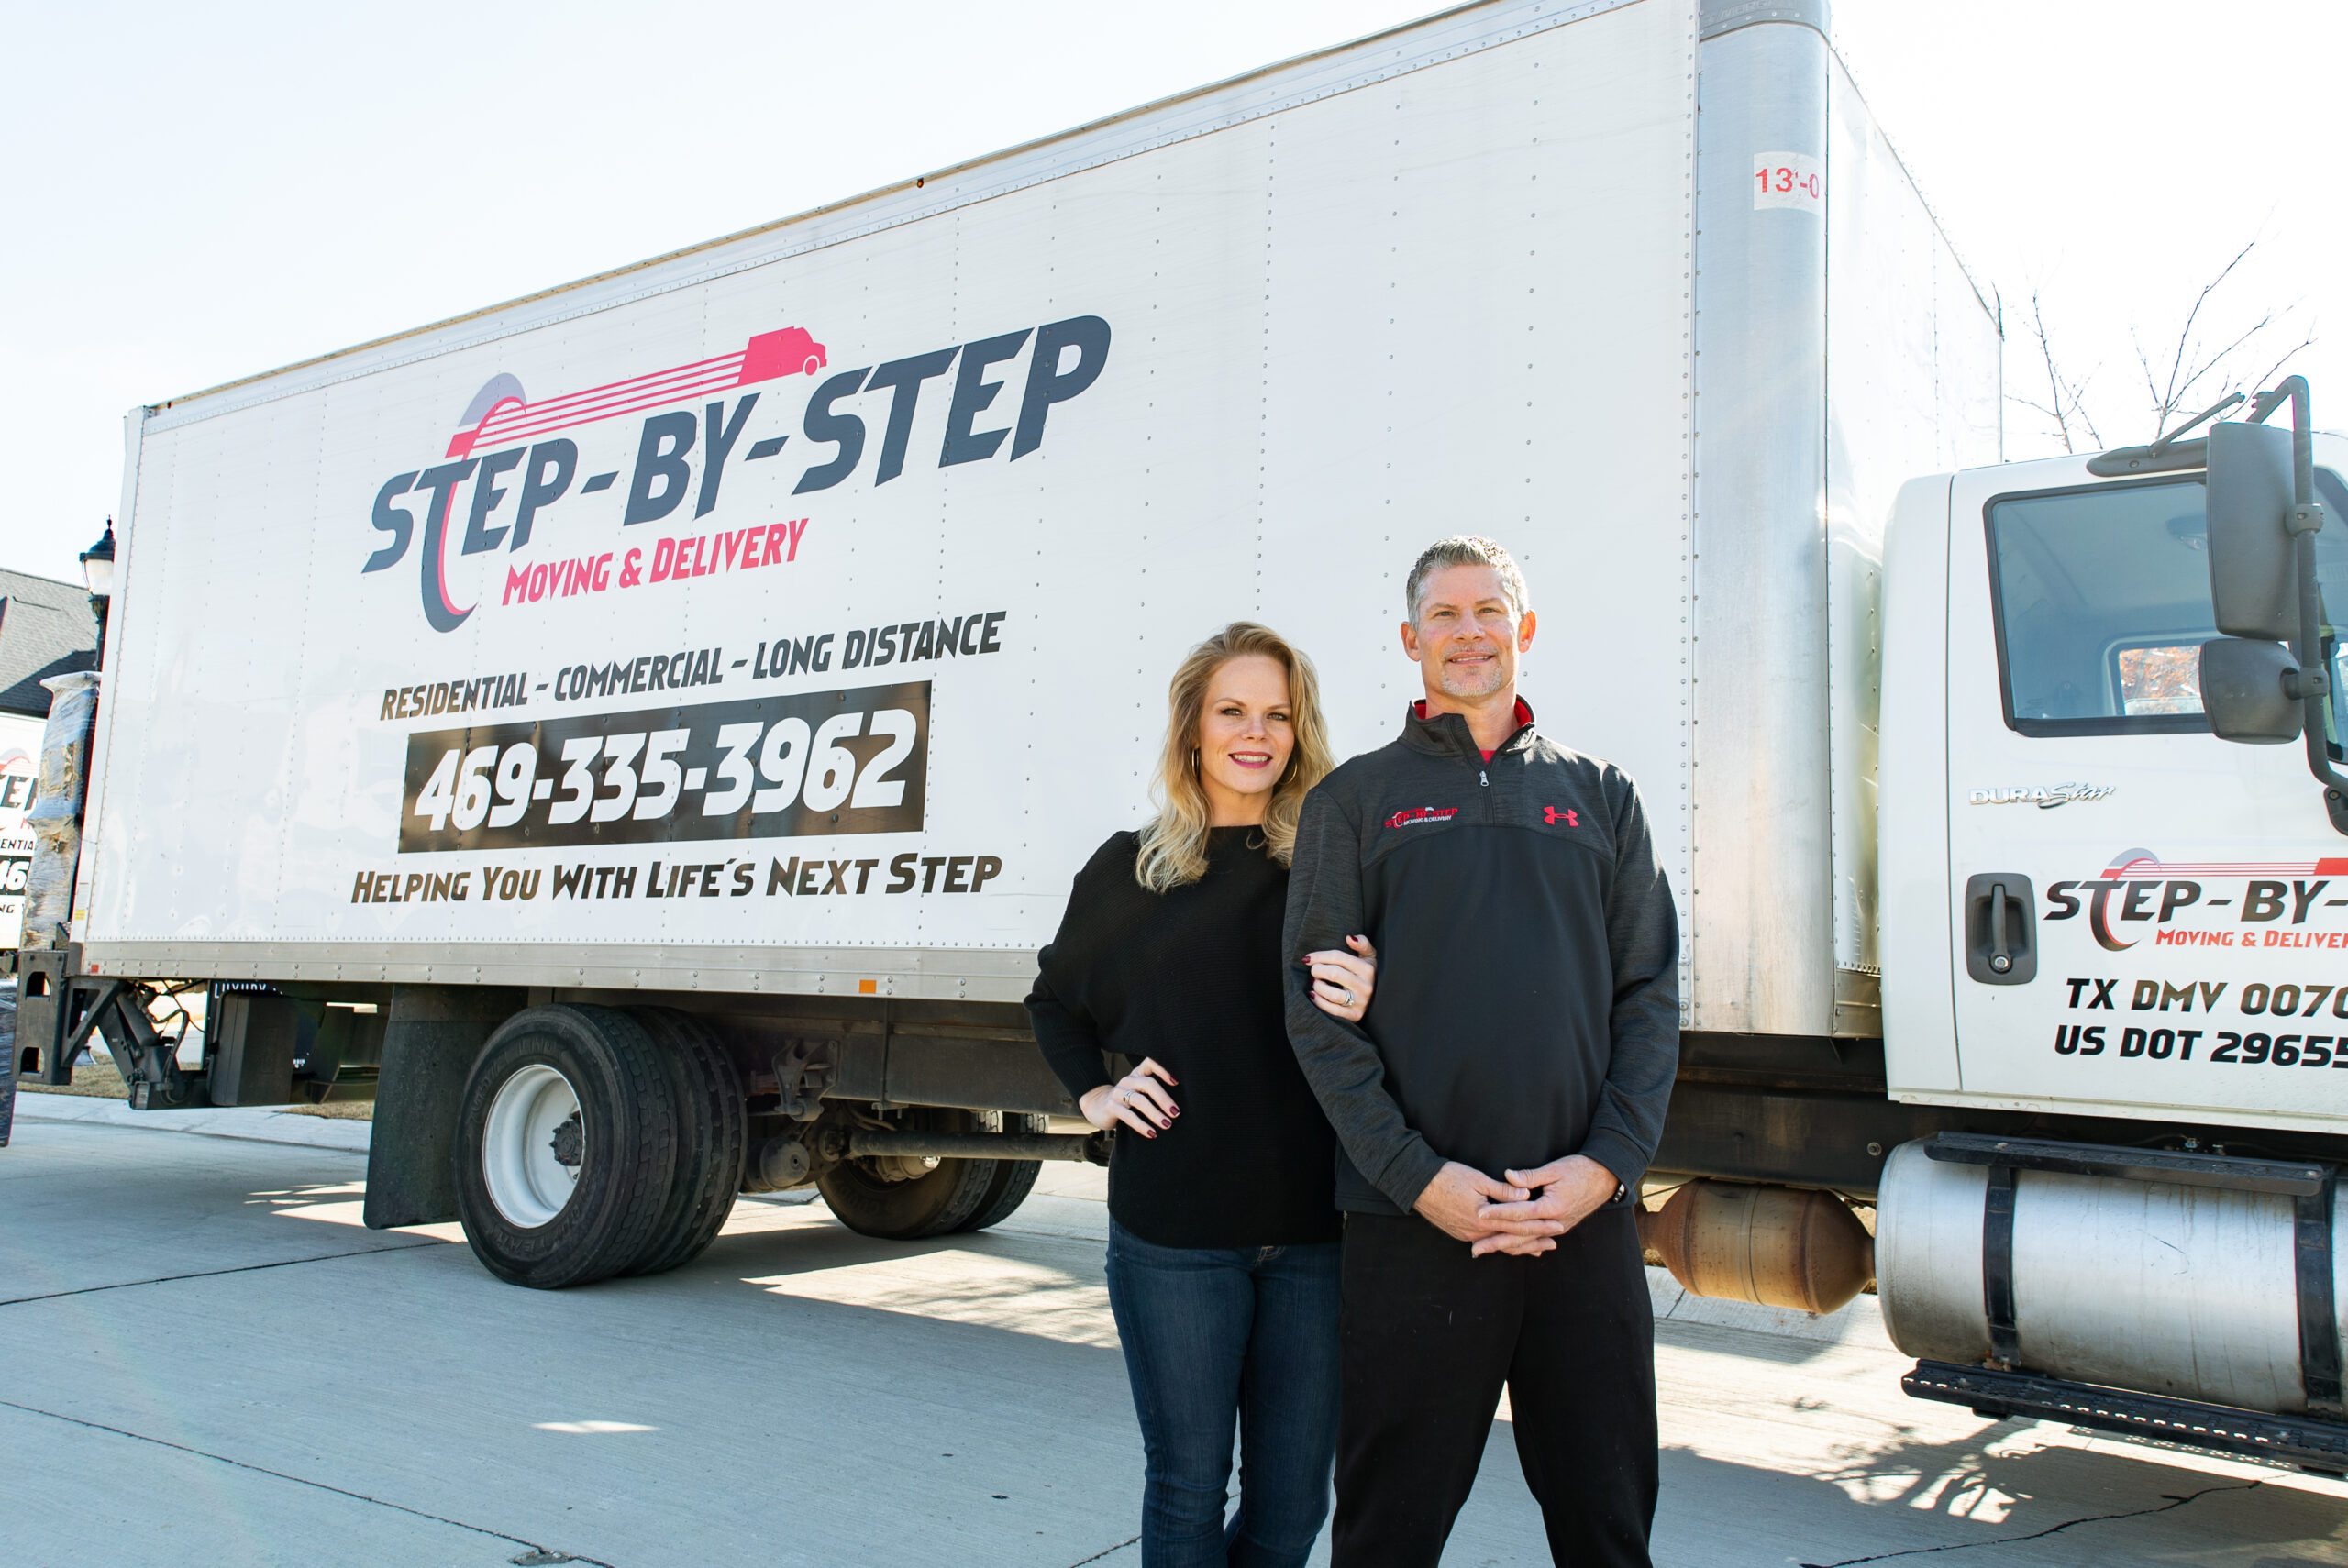 Step by Step moving company- North texas